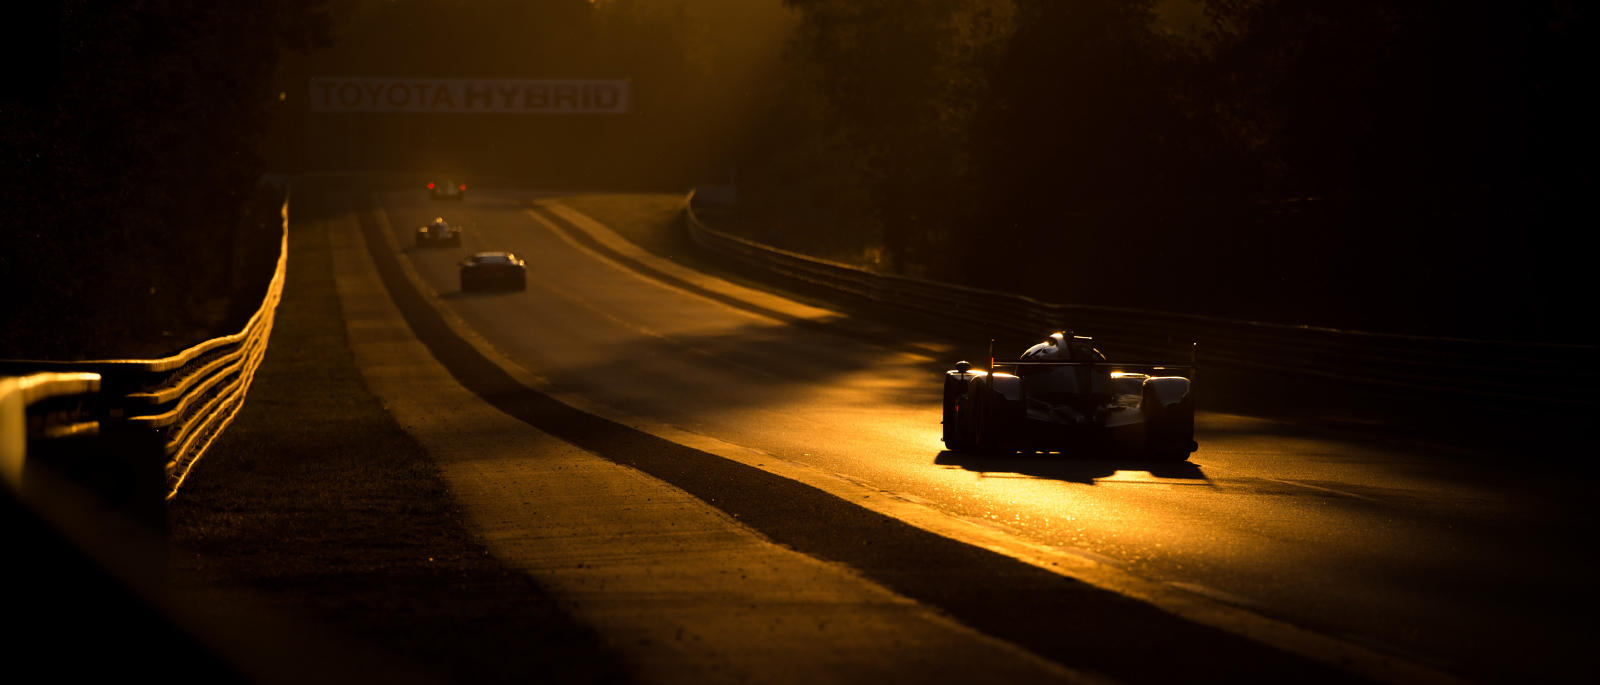 TS050 HYBRID will compete the 24 Hours of Le Mans.